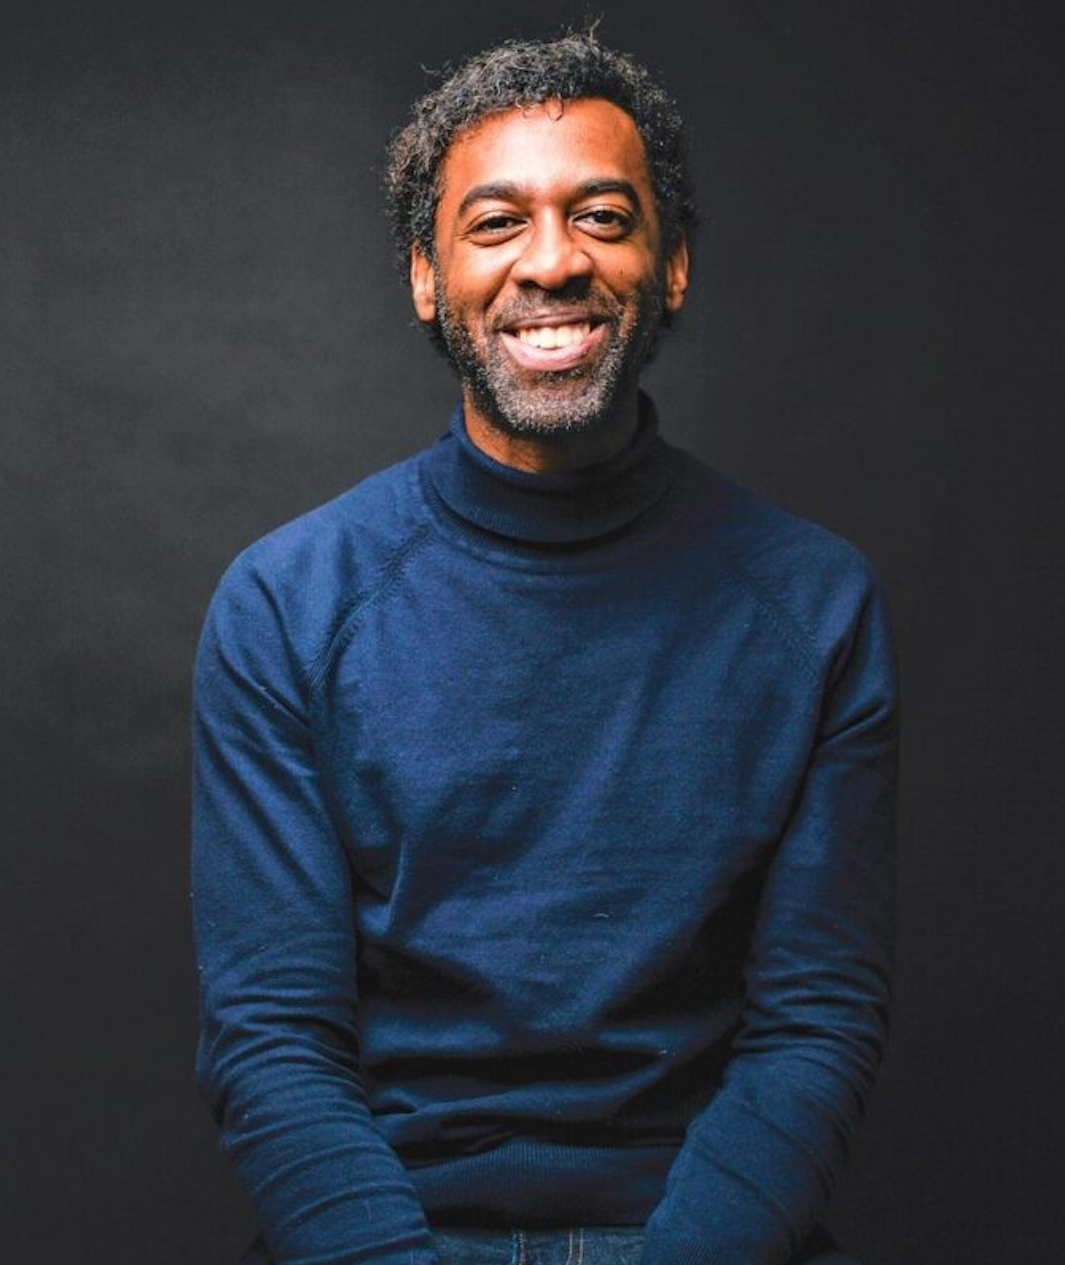 NEXT LEVEL: Author Ian Williams named chair of the 2023 Scotiabank Giller Prize jury, Mwaba gets seat on Calgary Chamber of Commerce board